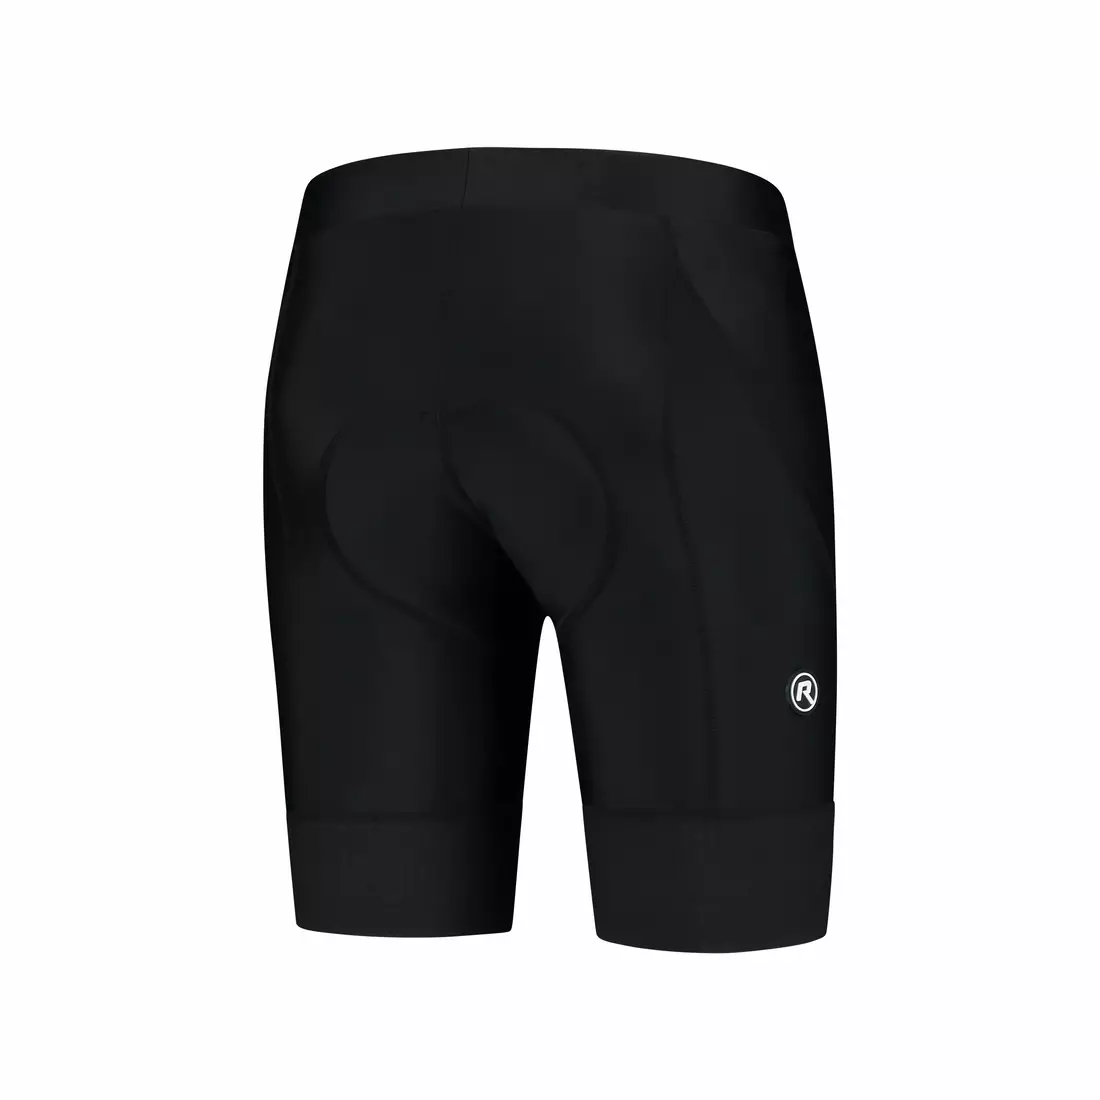 Rogelli men's POWER cycling shorts without suspenders